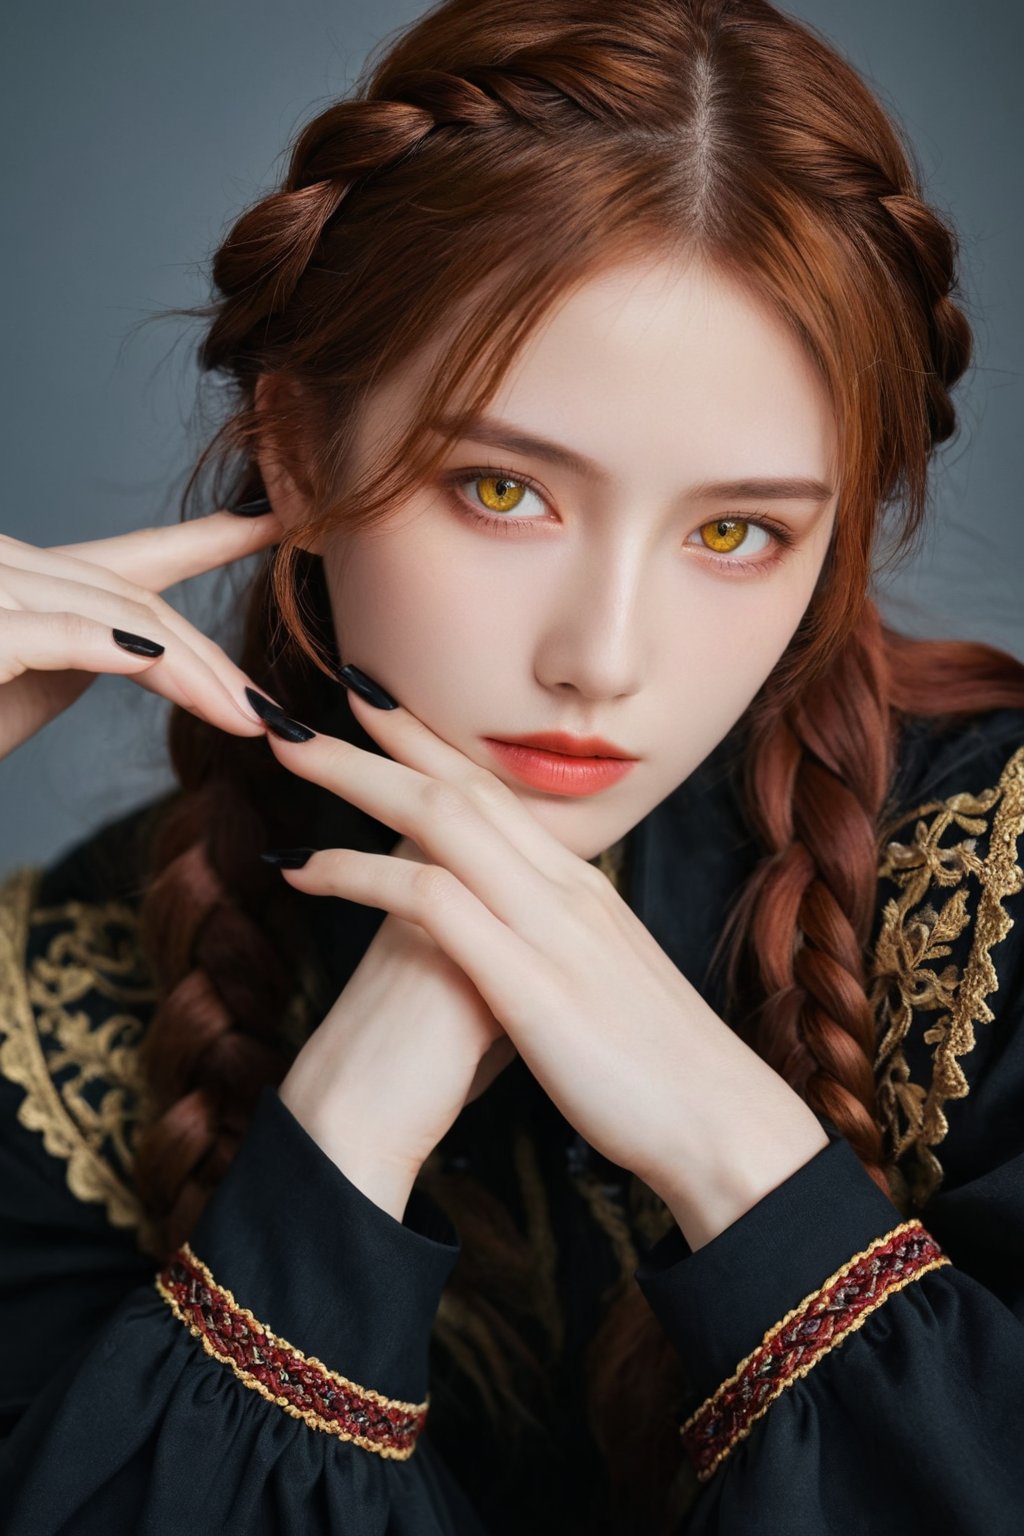 (ultra realistic,best quality),photorealistic,Extremely Realistic,in depth,cinematic light,hubggirl,

BREAK

stunning anime portrait of a red-haired girl with intense yellow eyes, close-up view, intricate hand details, braided hair, dark clothing, strong light and shadow contrasts, black nails, 17 years old, 

BREAK

dynamic poses, particle effects, perfect hands, perfect lighting, vibrant colors, intricate details, high detailed skin, intricate background, realistic, raw, analog, taken by Sony Alpha 7R IV, Zeiss Otus 85mm F1.4, ISO 100 Shutter Speed 1/400, Vivid picture, More Reasonable Details